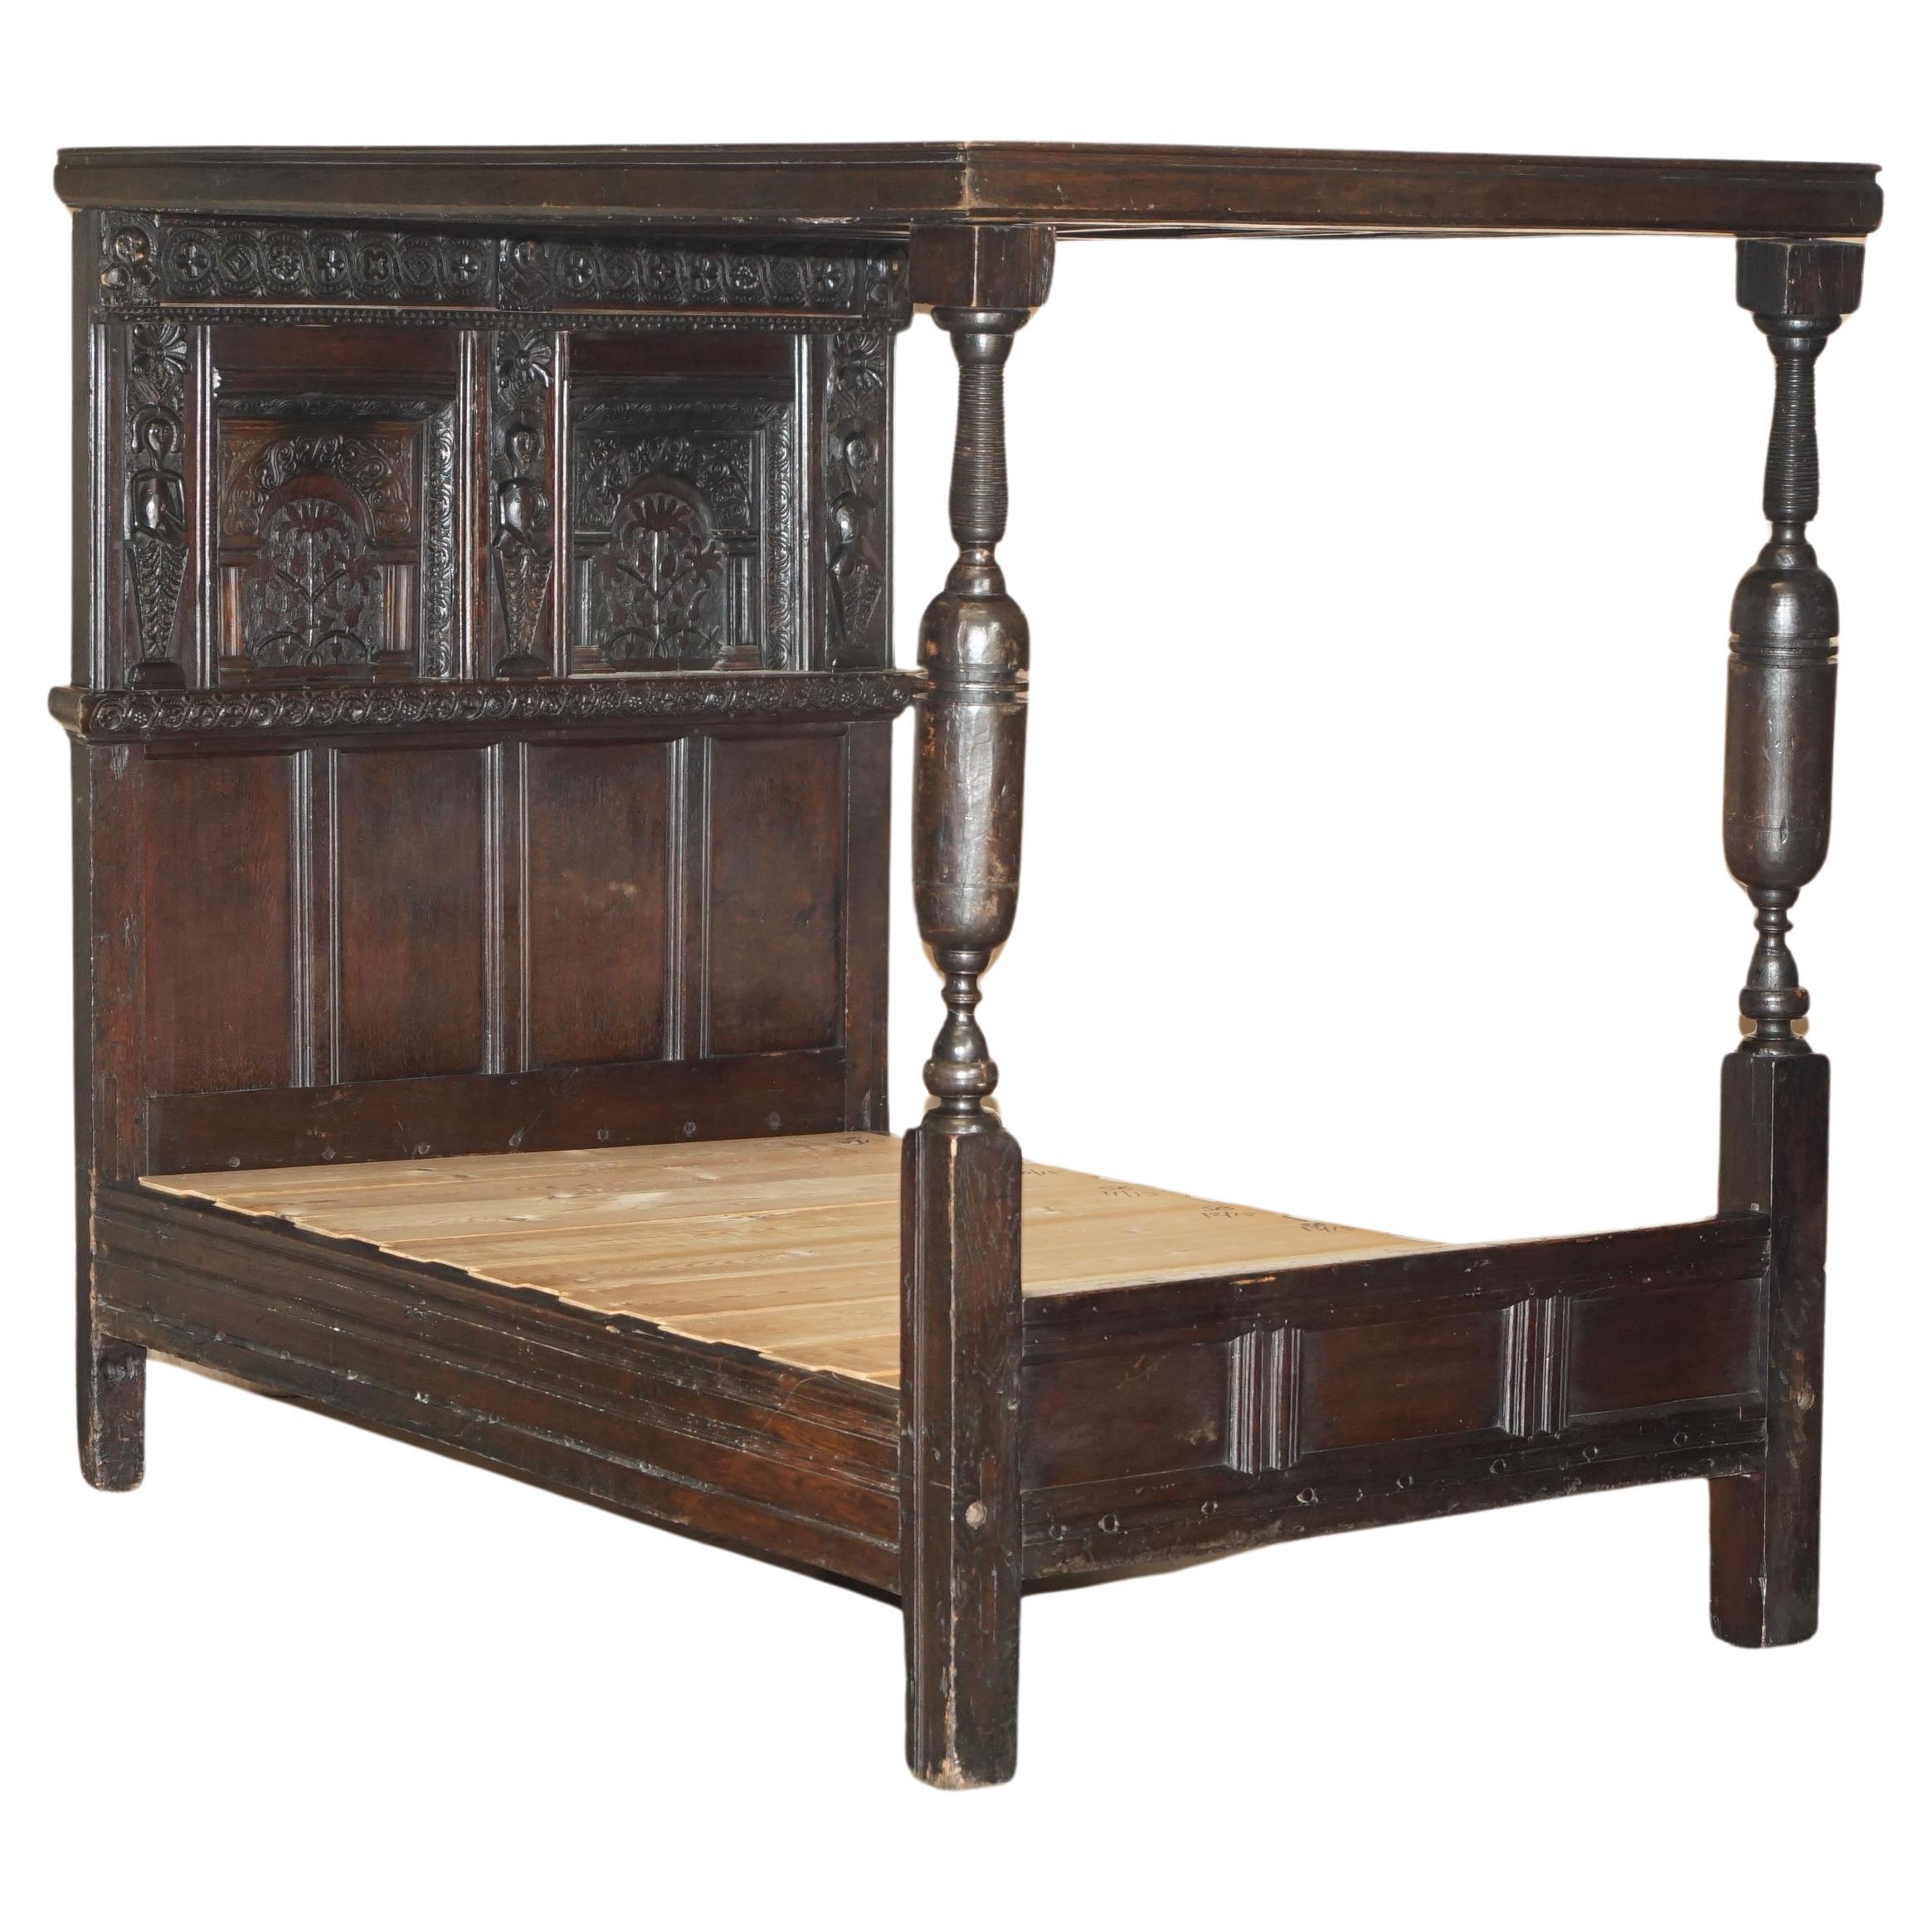 17TH CENTURY JACOBEAN WILLIAM III CIRCA 1650 ENGLiSH OAK TESTER FOUR POSTER BED For Sale